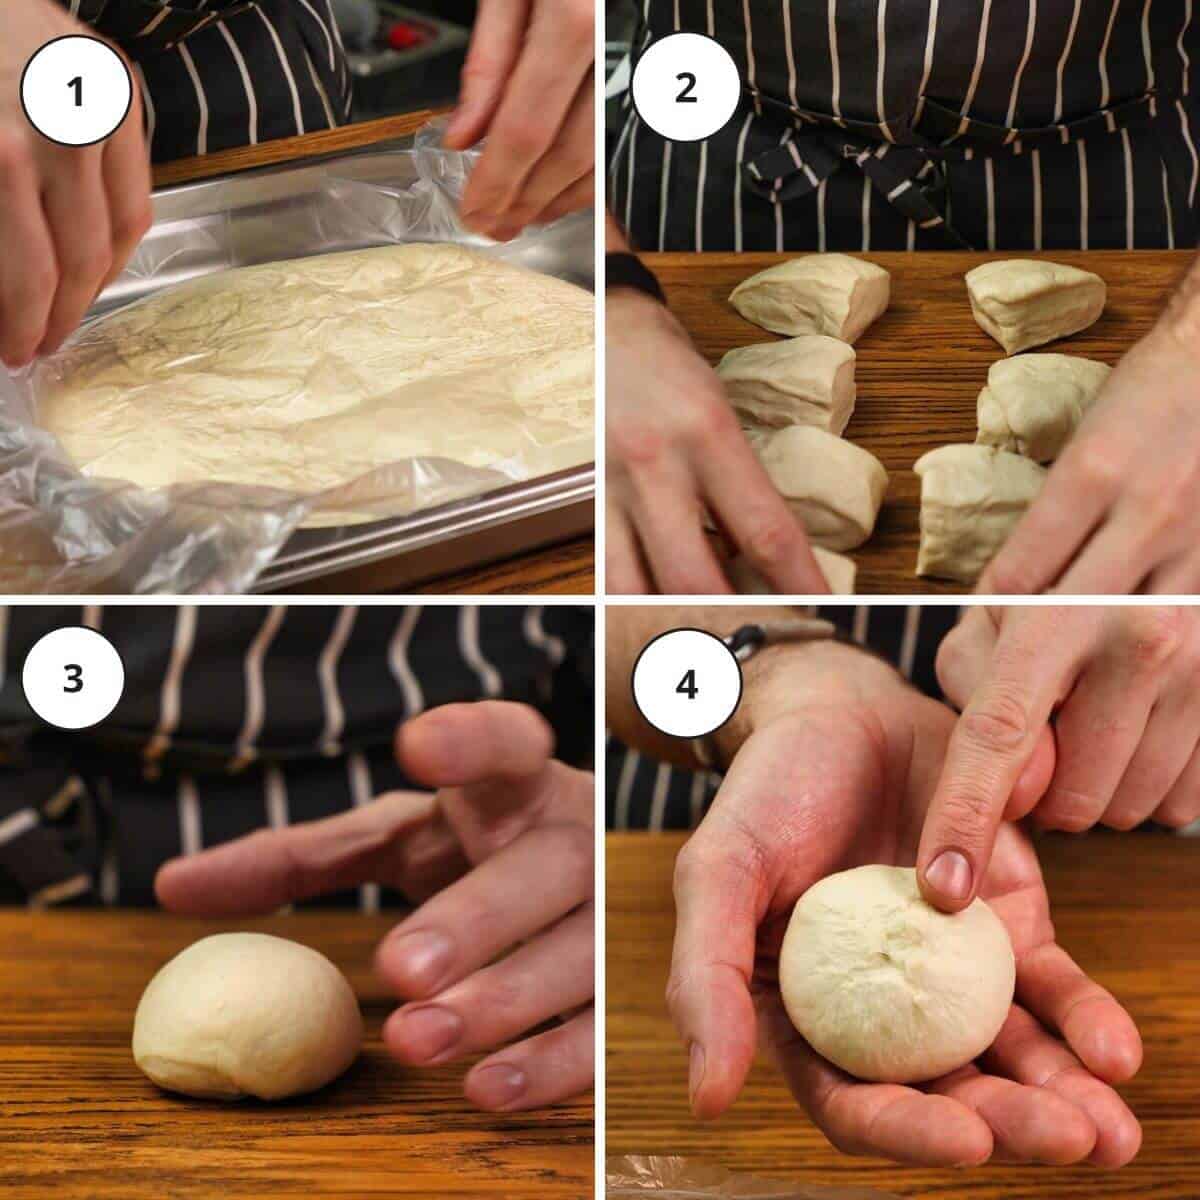 Steps for shaping the buns.